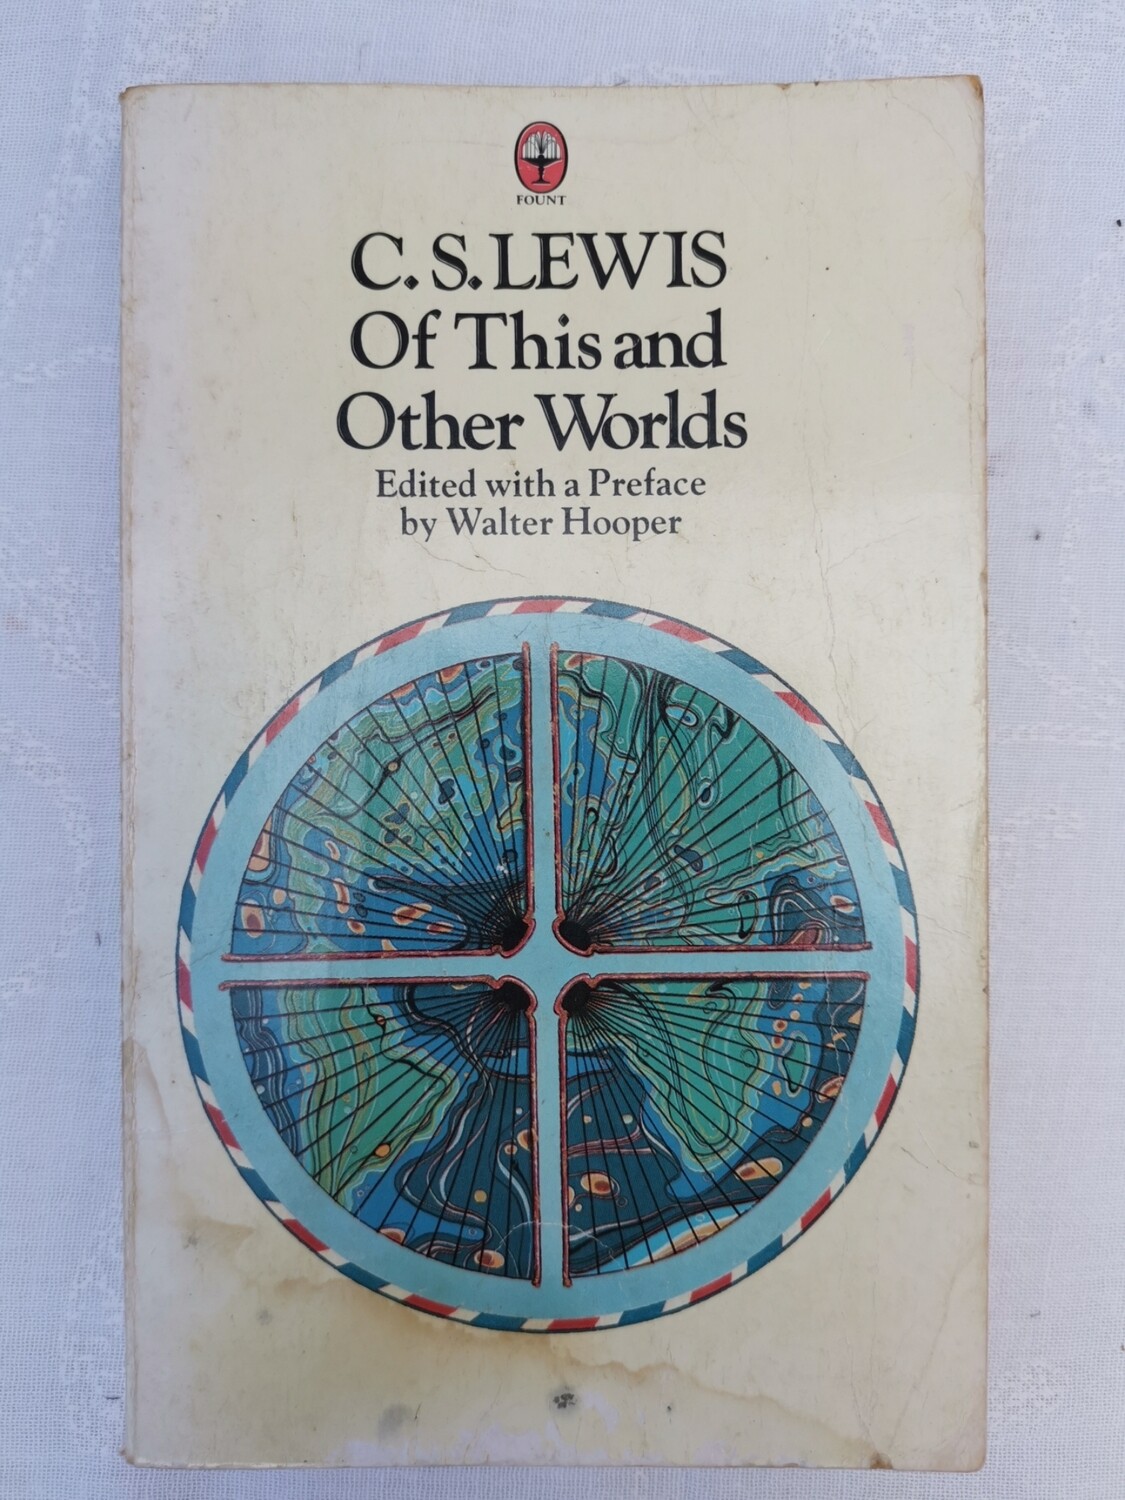 Of this and other worlds, C. S. Lewis